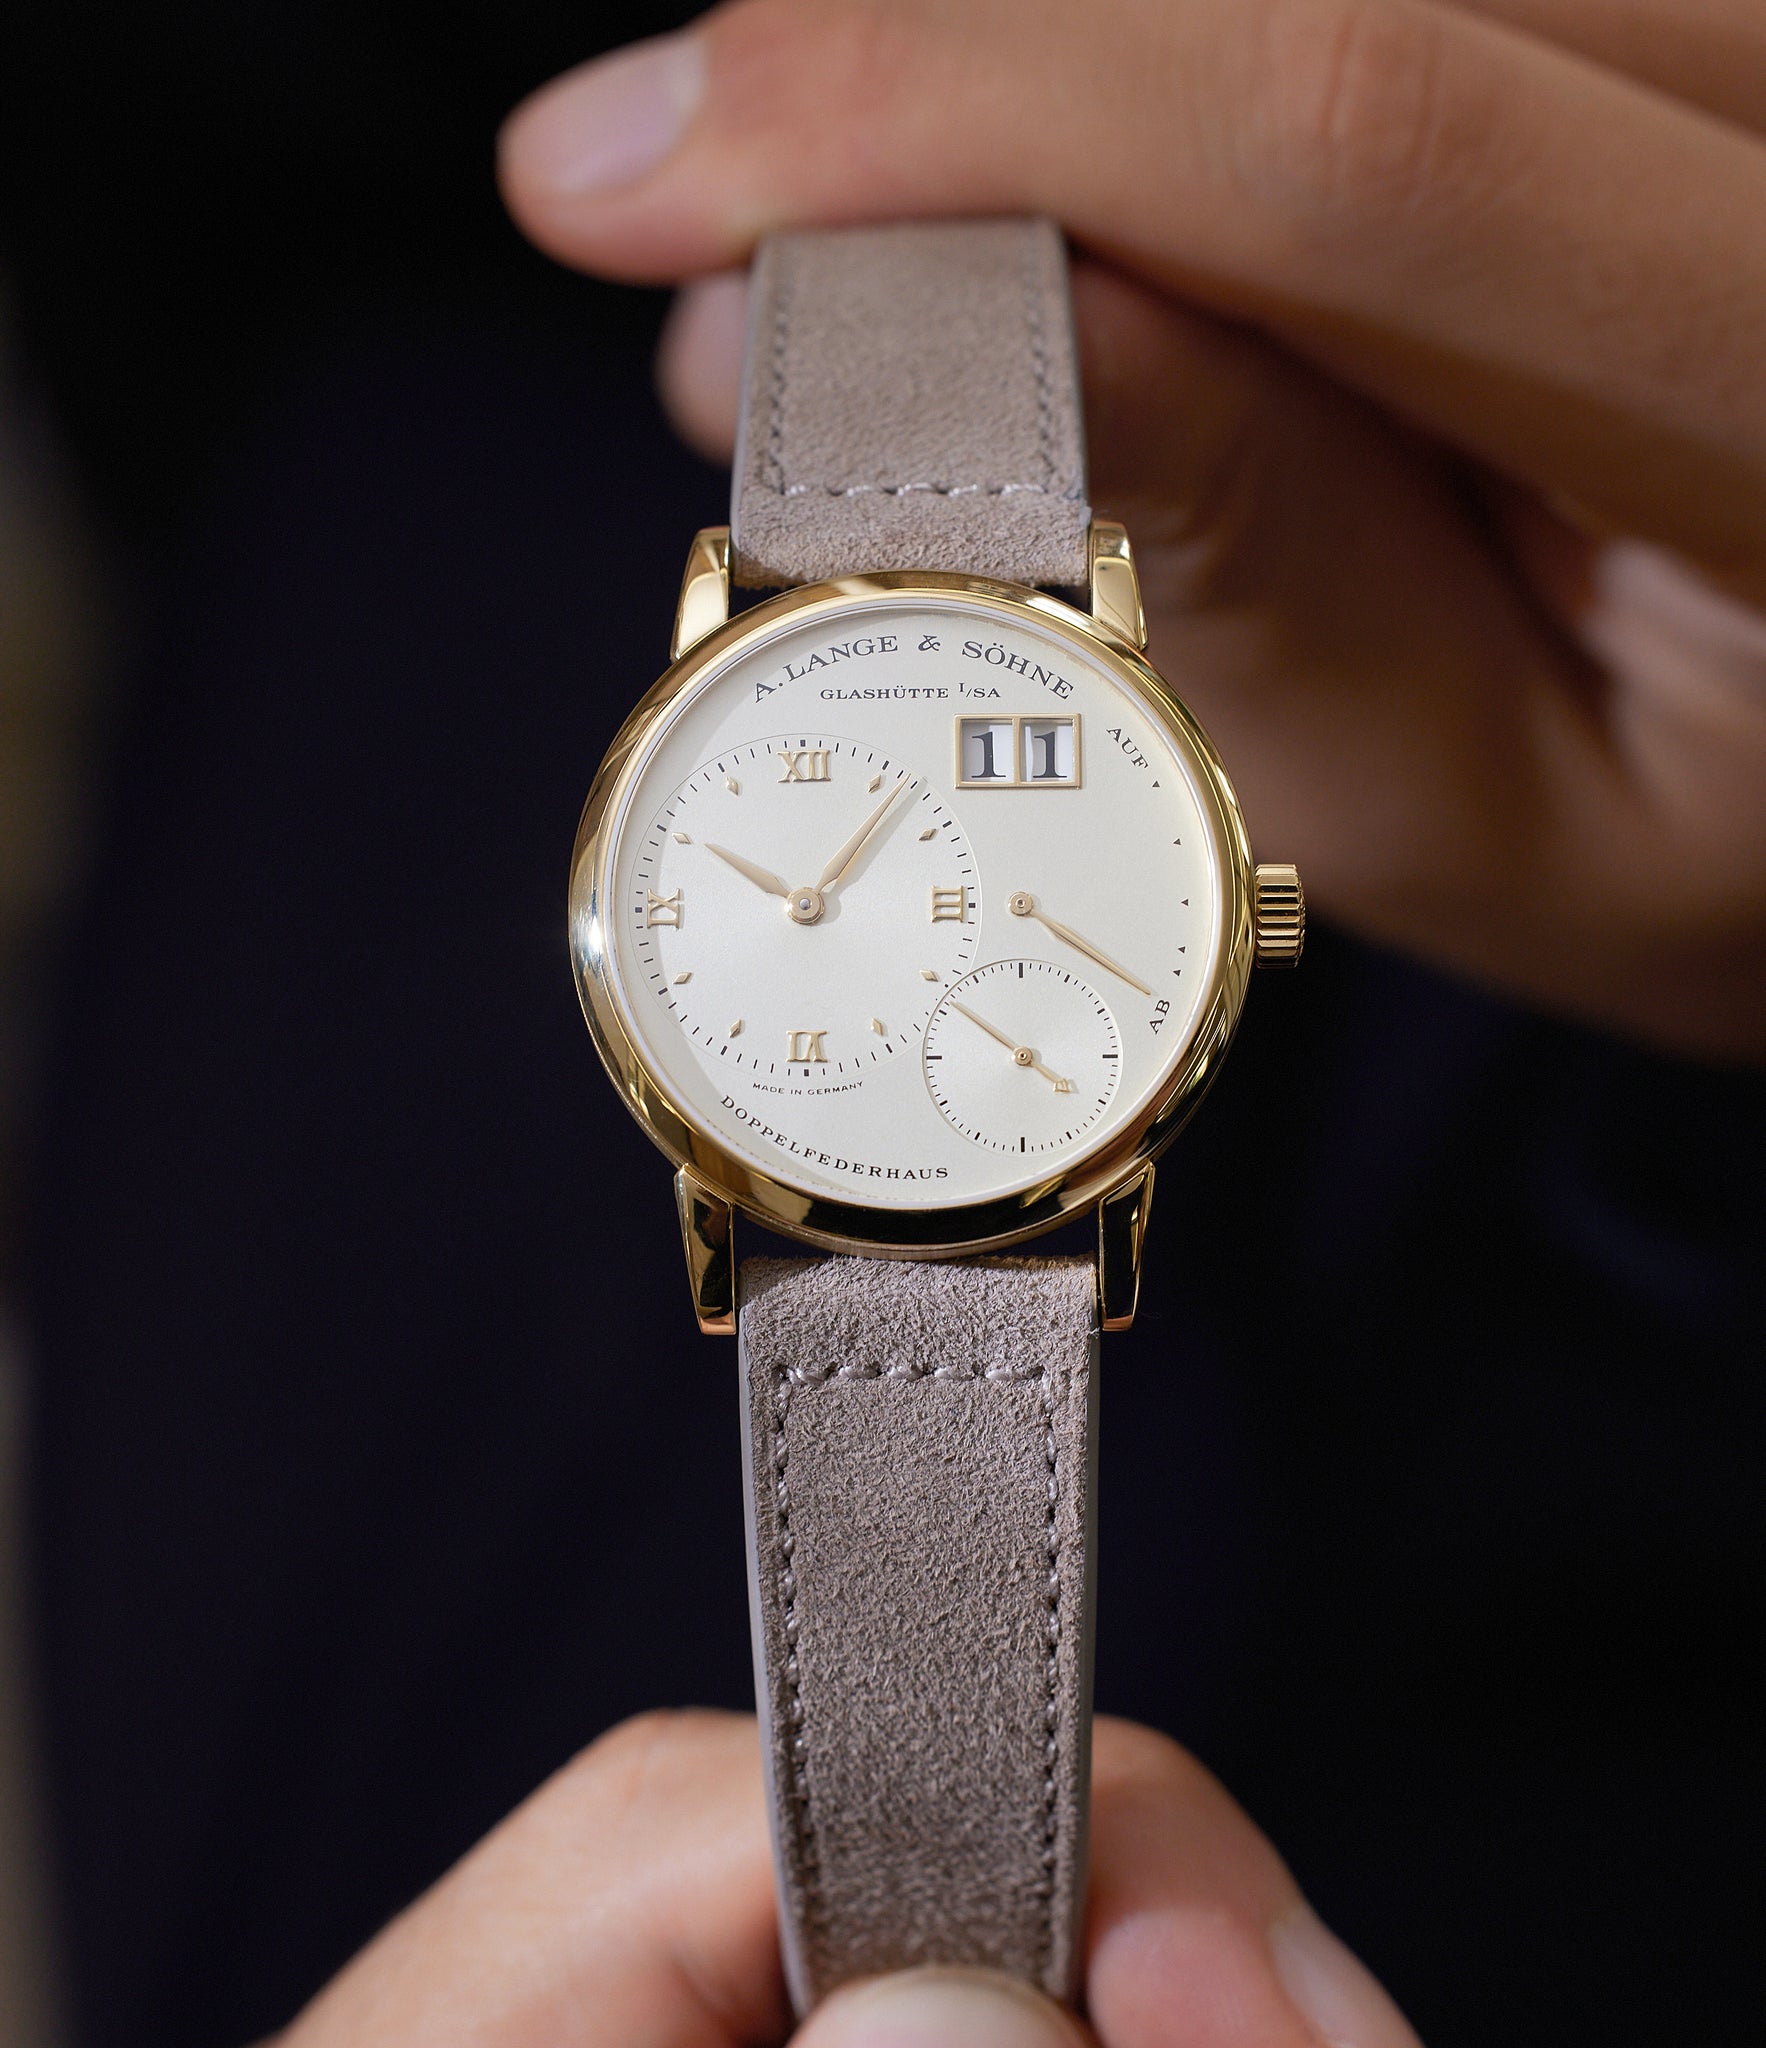 A.Lange & Söhne “Little” Lange 1 | Ref. 111.025  | Platinum | Buy rare Watches at A Collected Man London